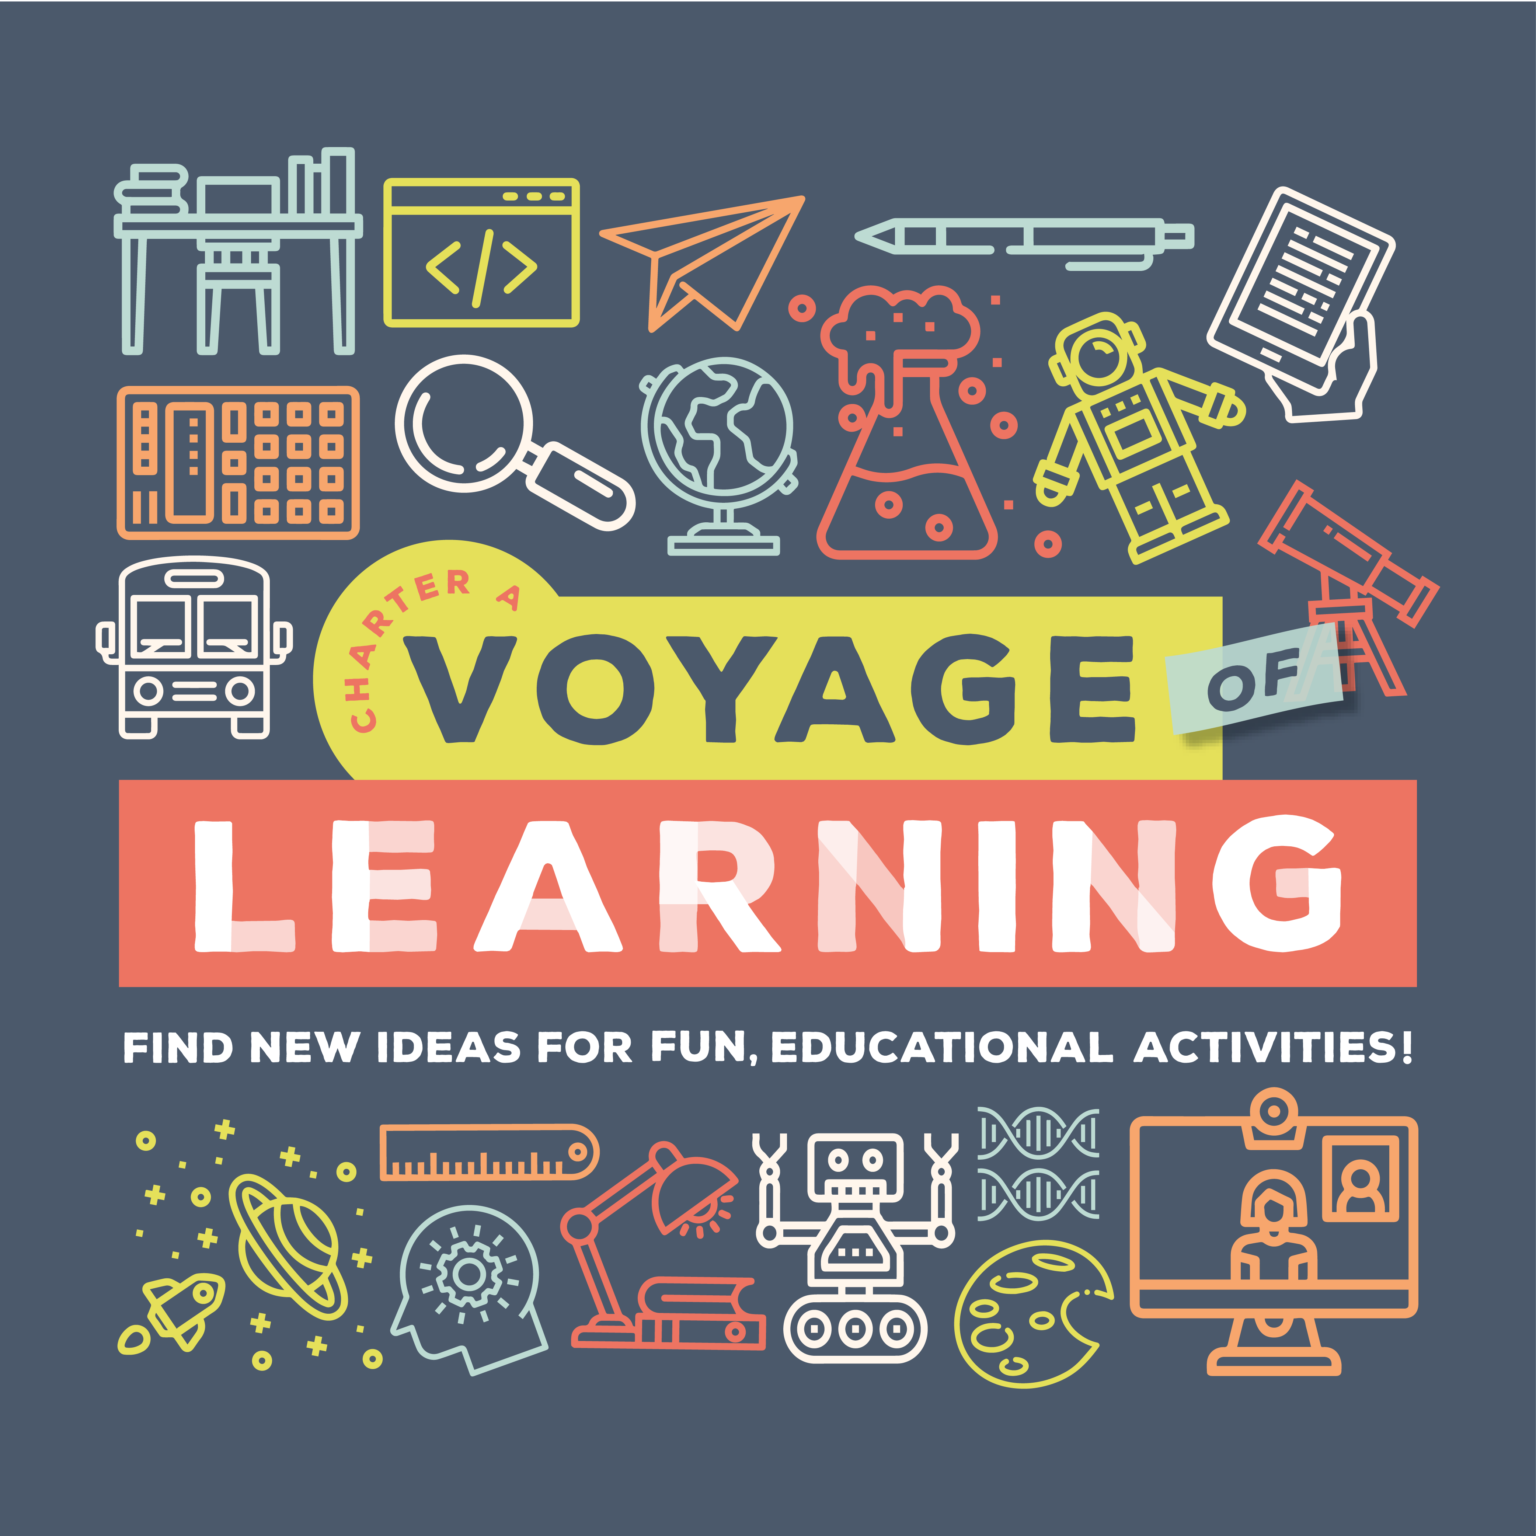 Charter a Voyage of Learning